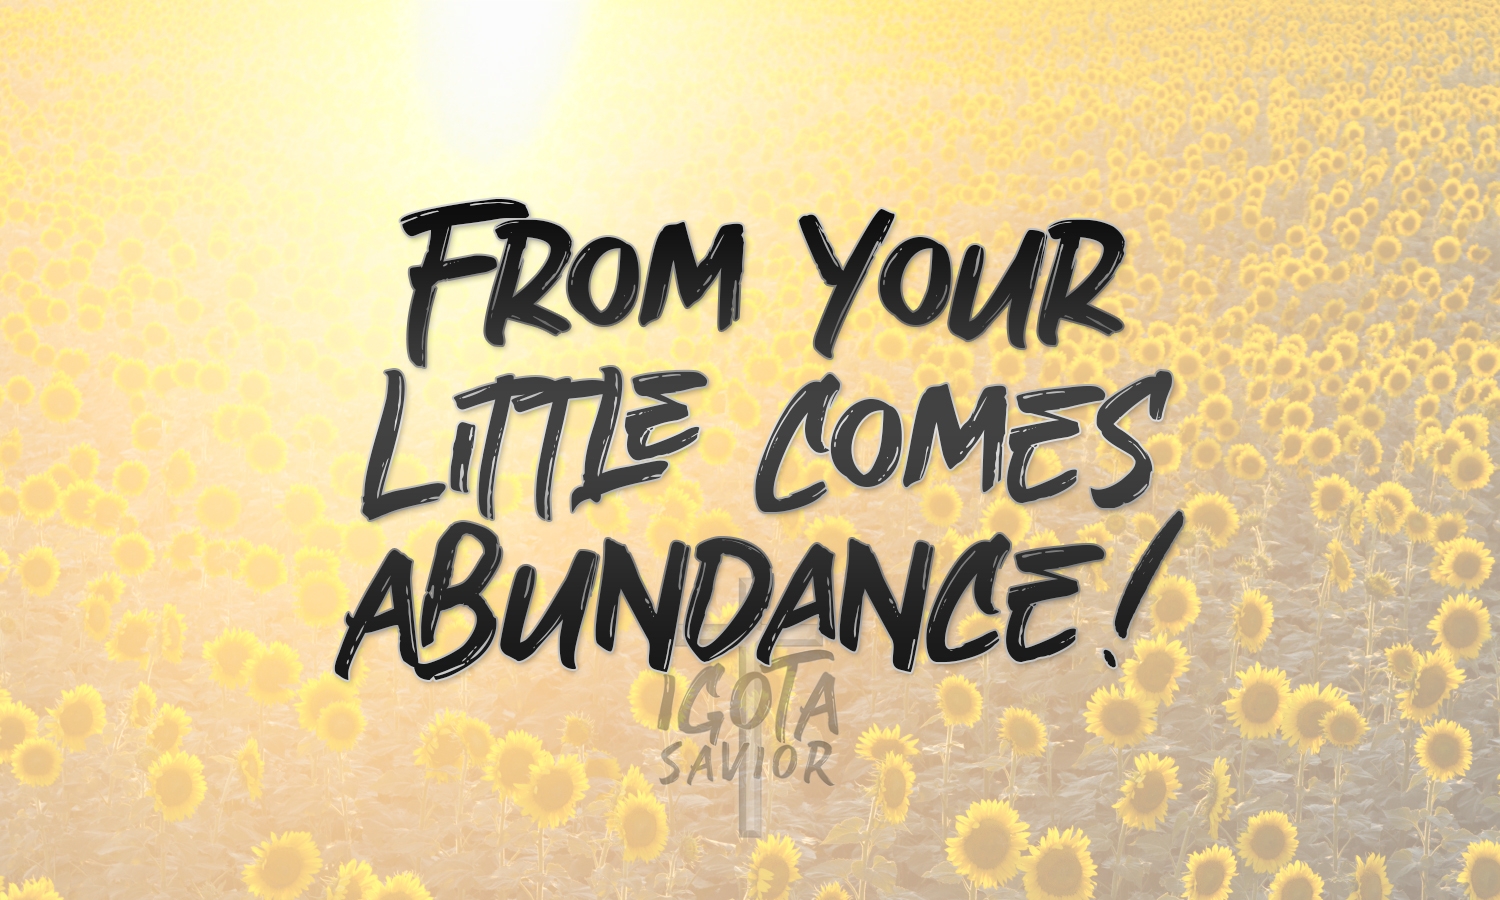 From Your Little Comes Abundance!